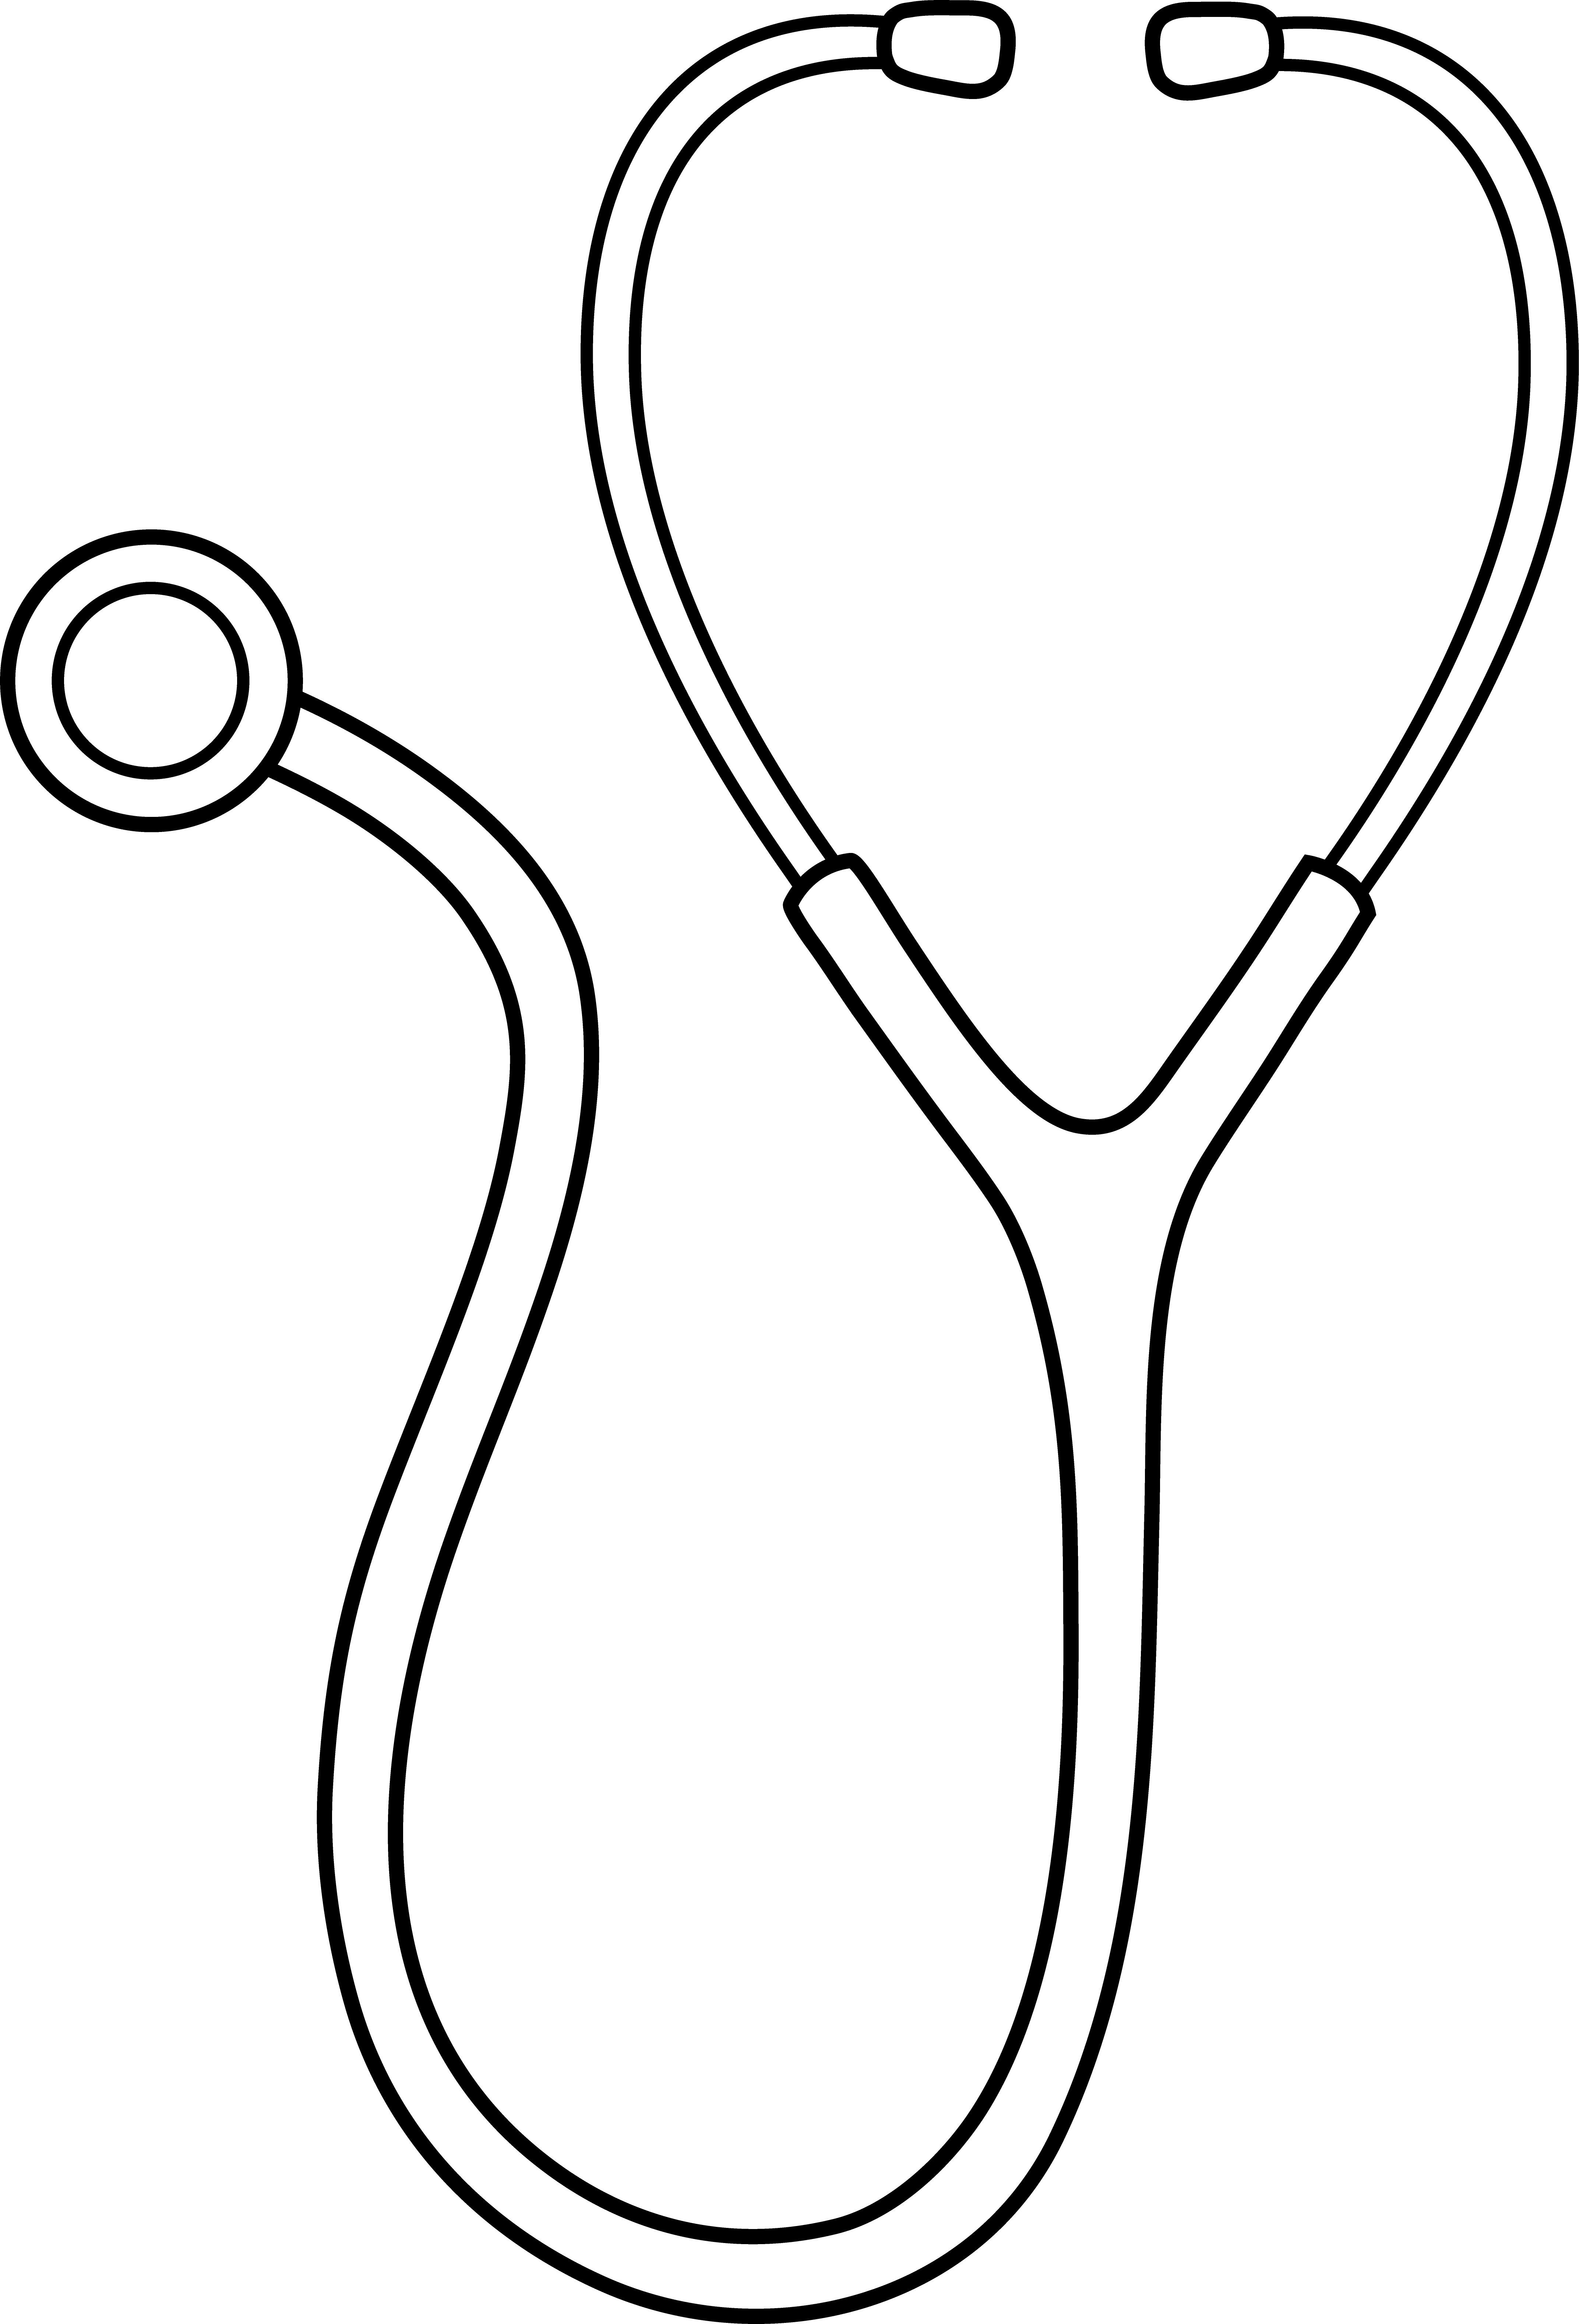 Stethoscope panda free images. Vaccine clipart doctor tool